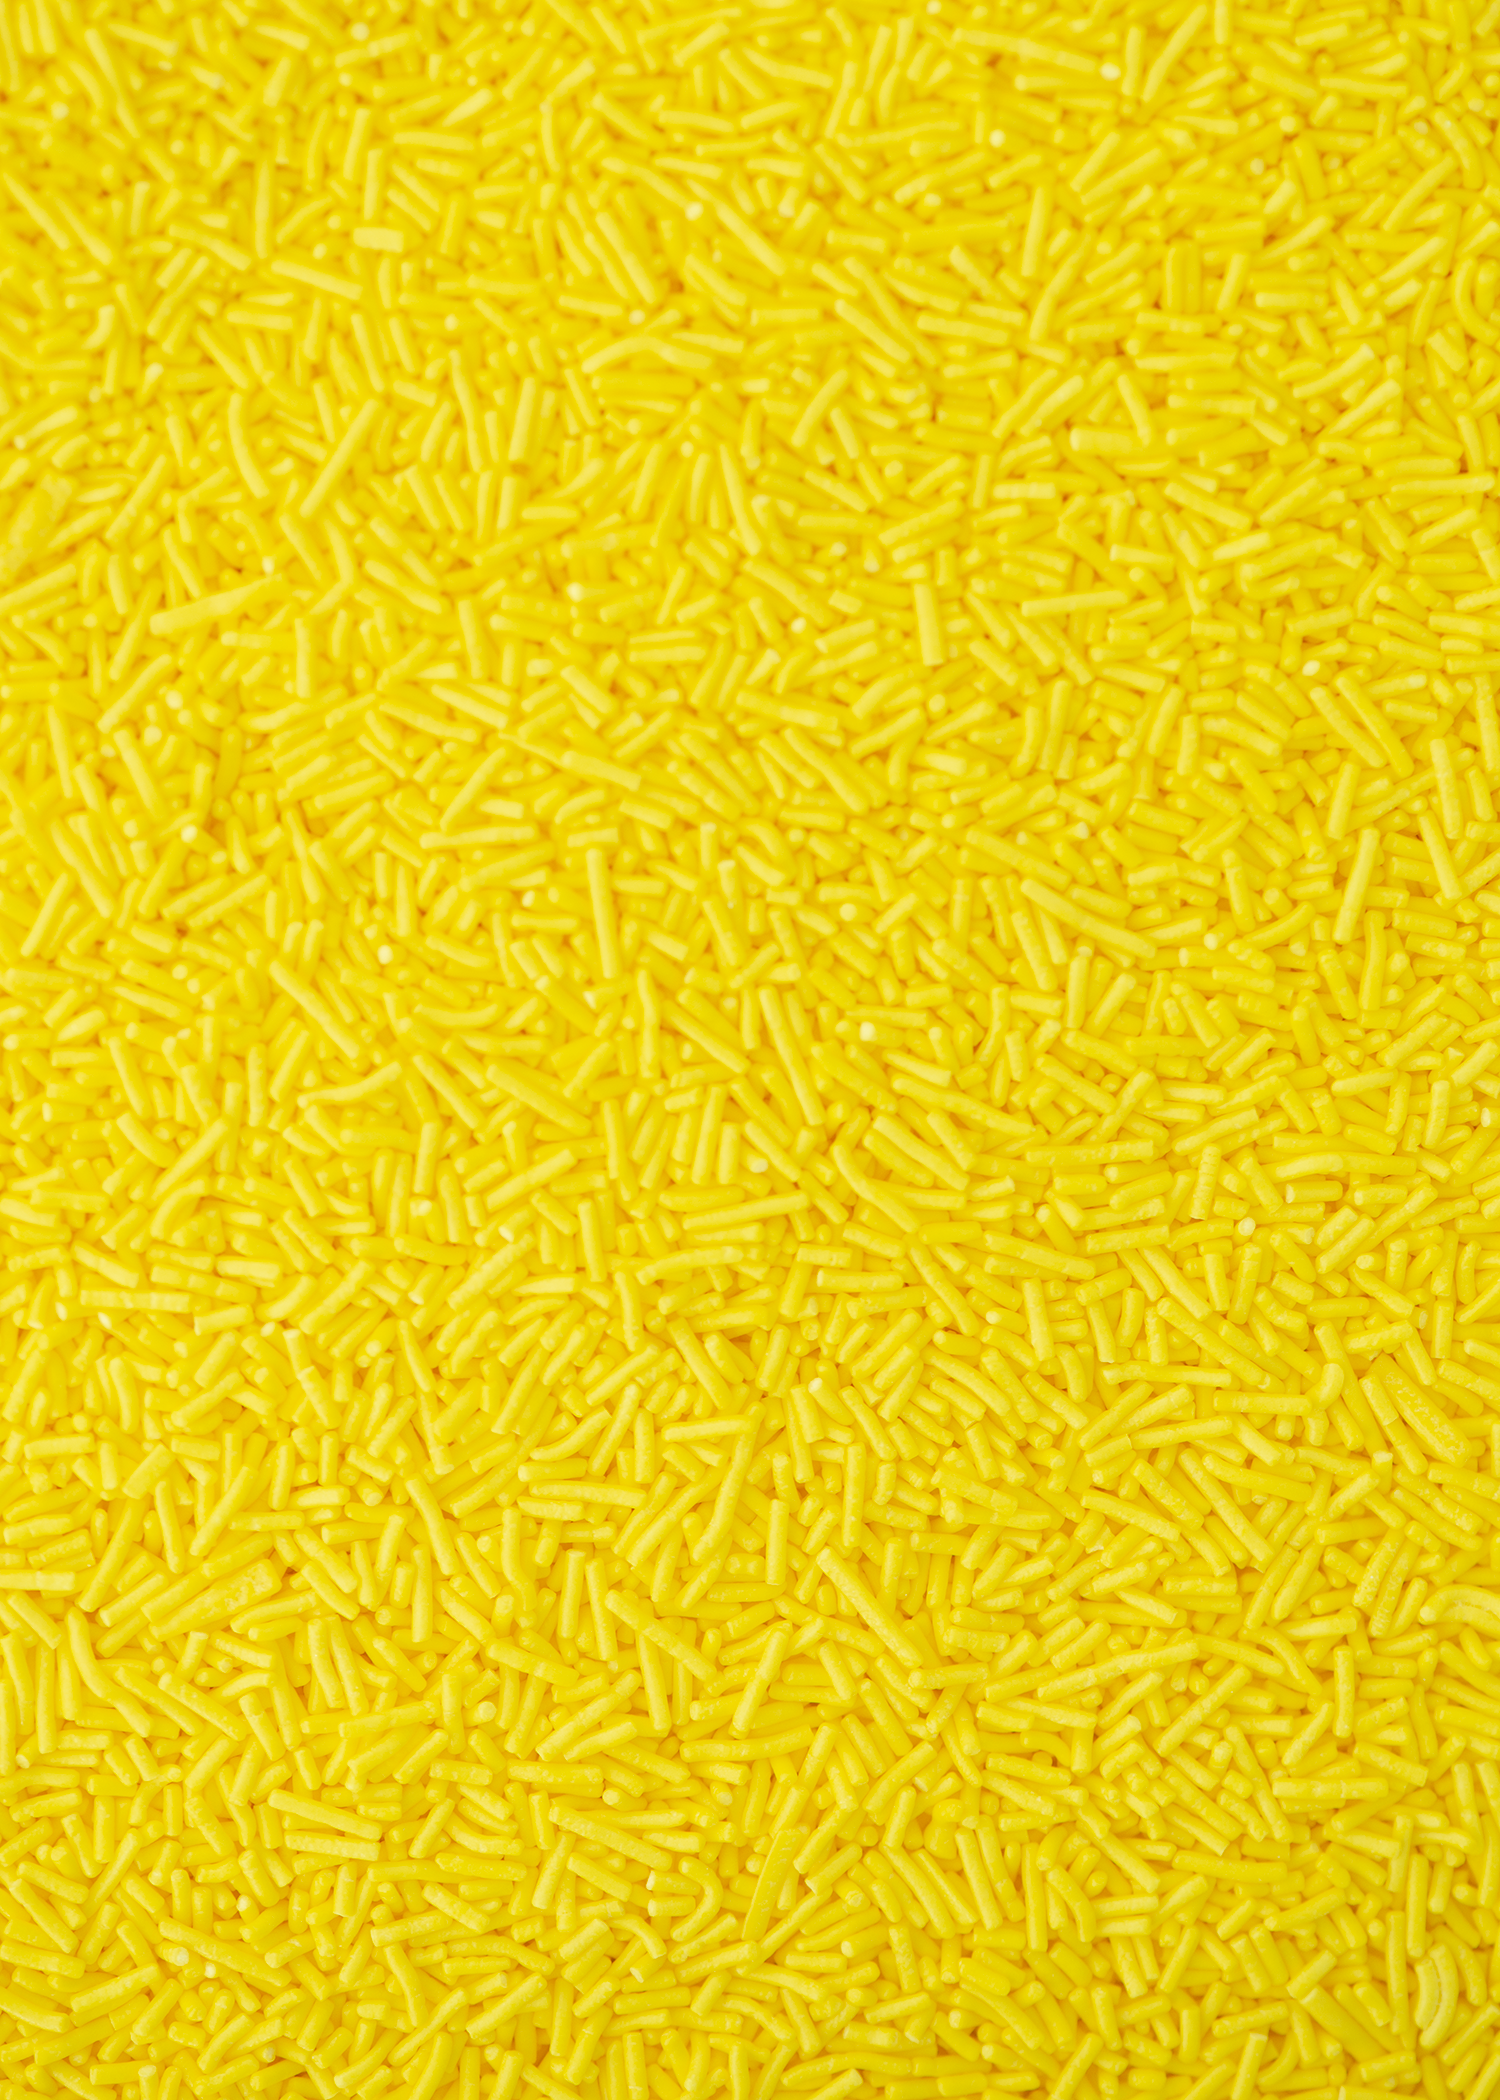 Bright Yellow Crunchy Sprinkles - US